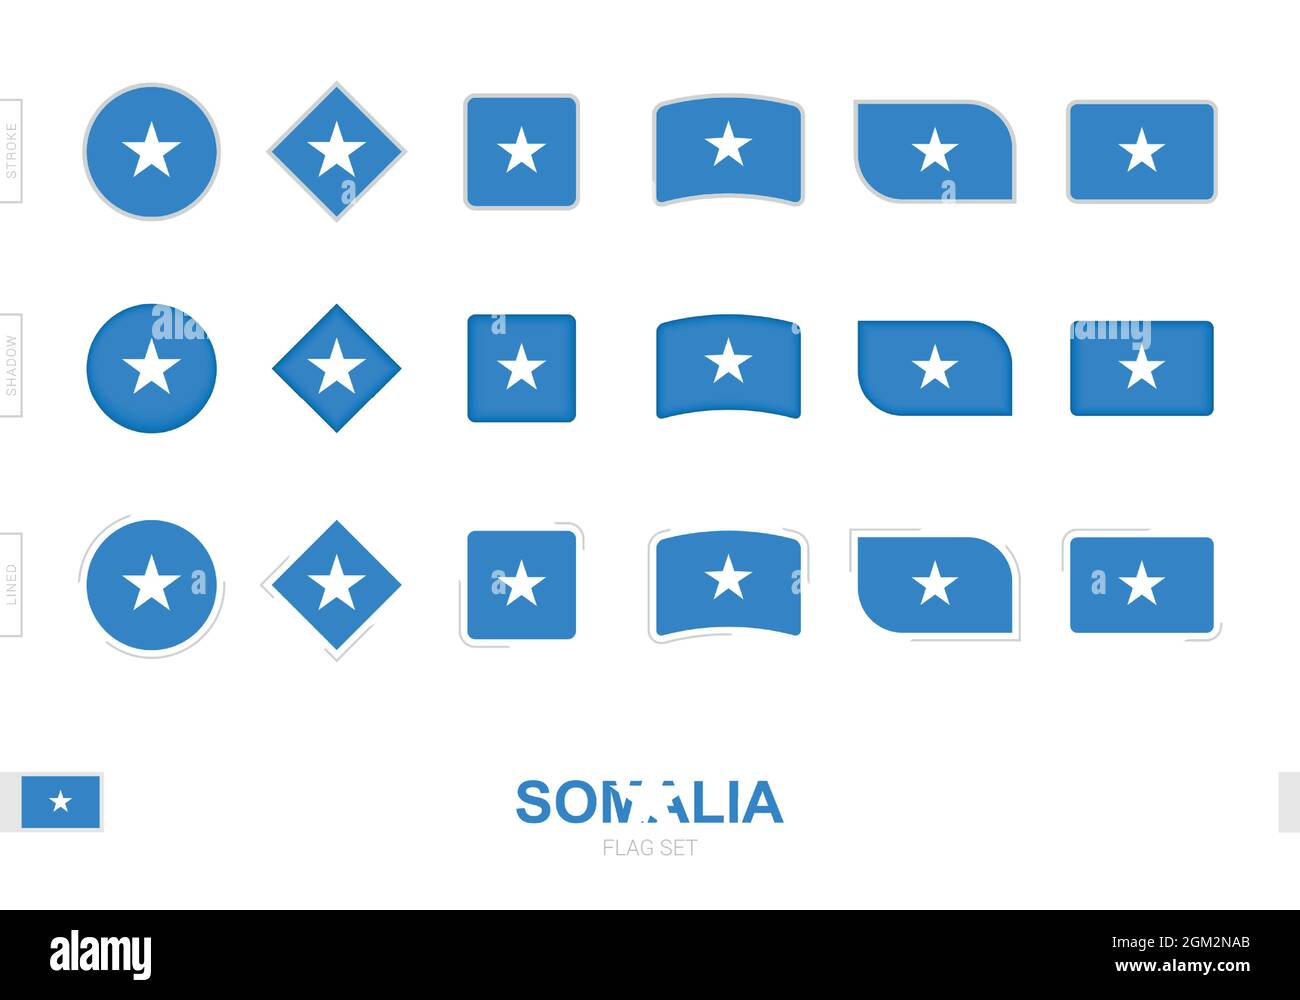 Somalia flag set, simple flags of Somalia with three different effects